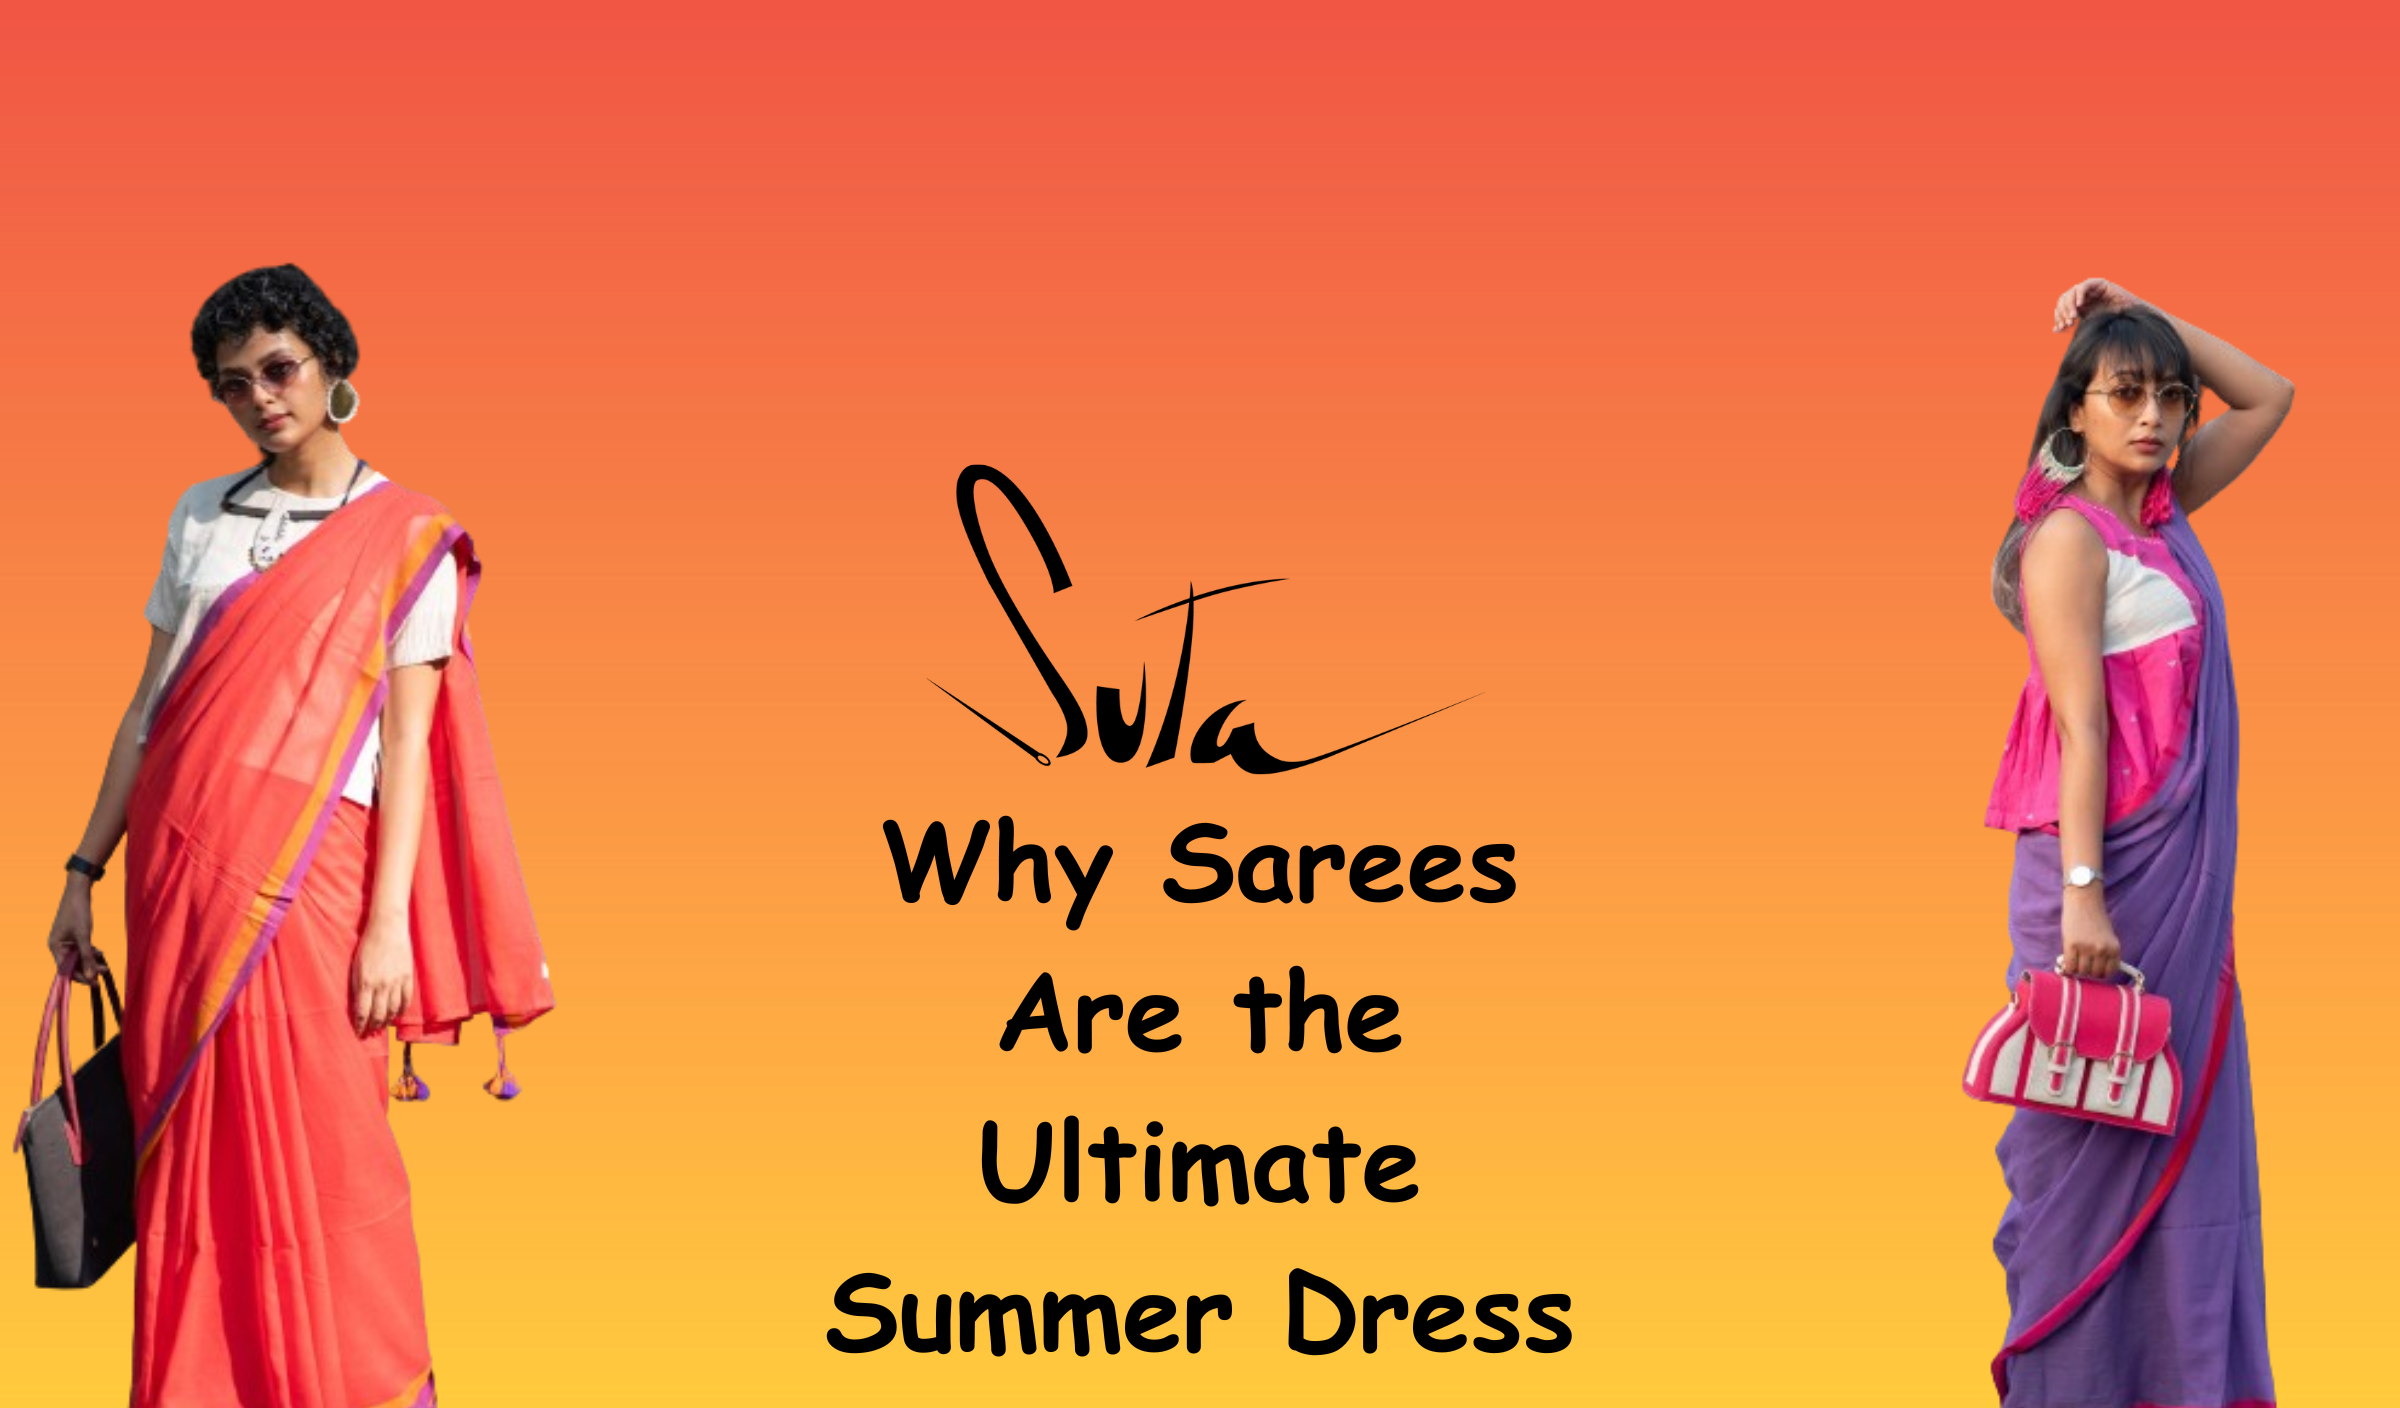 Why Sarees Are the Ultimate Summer Dress!